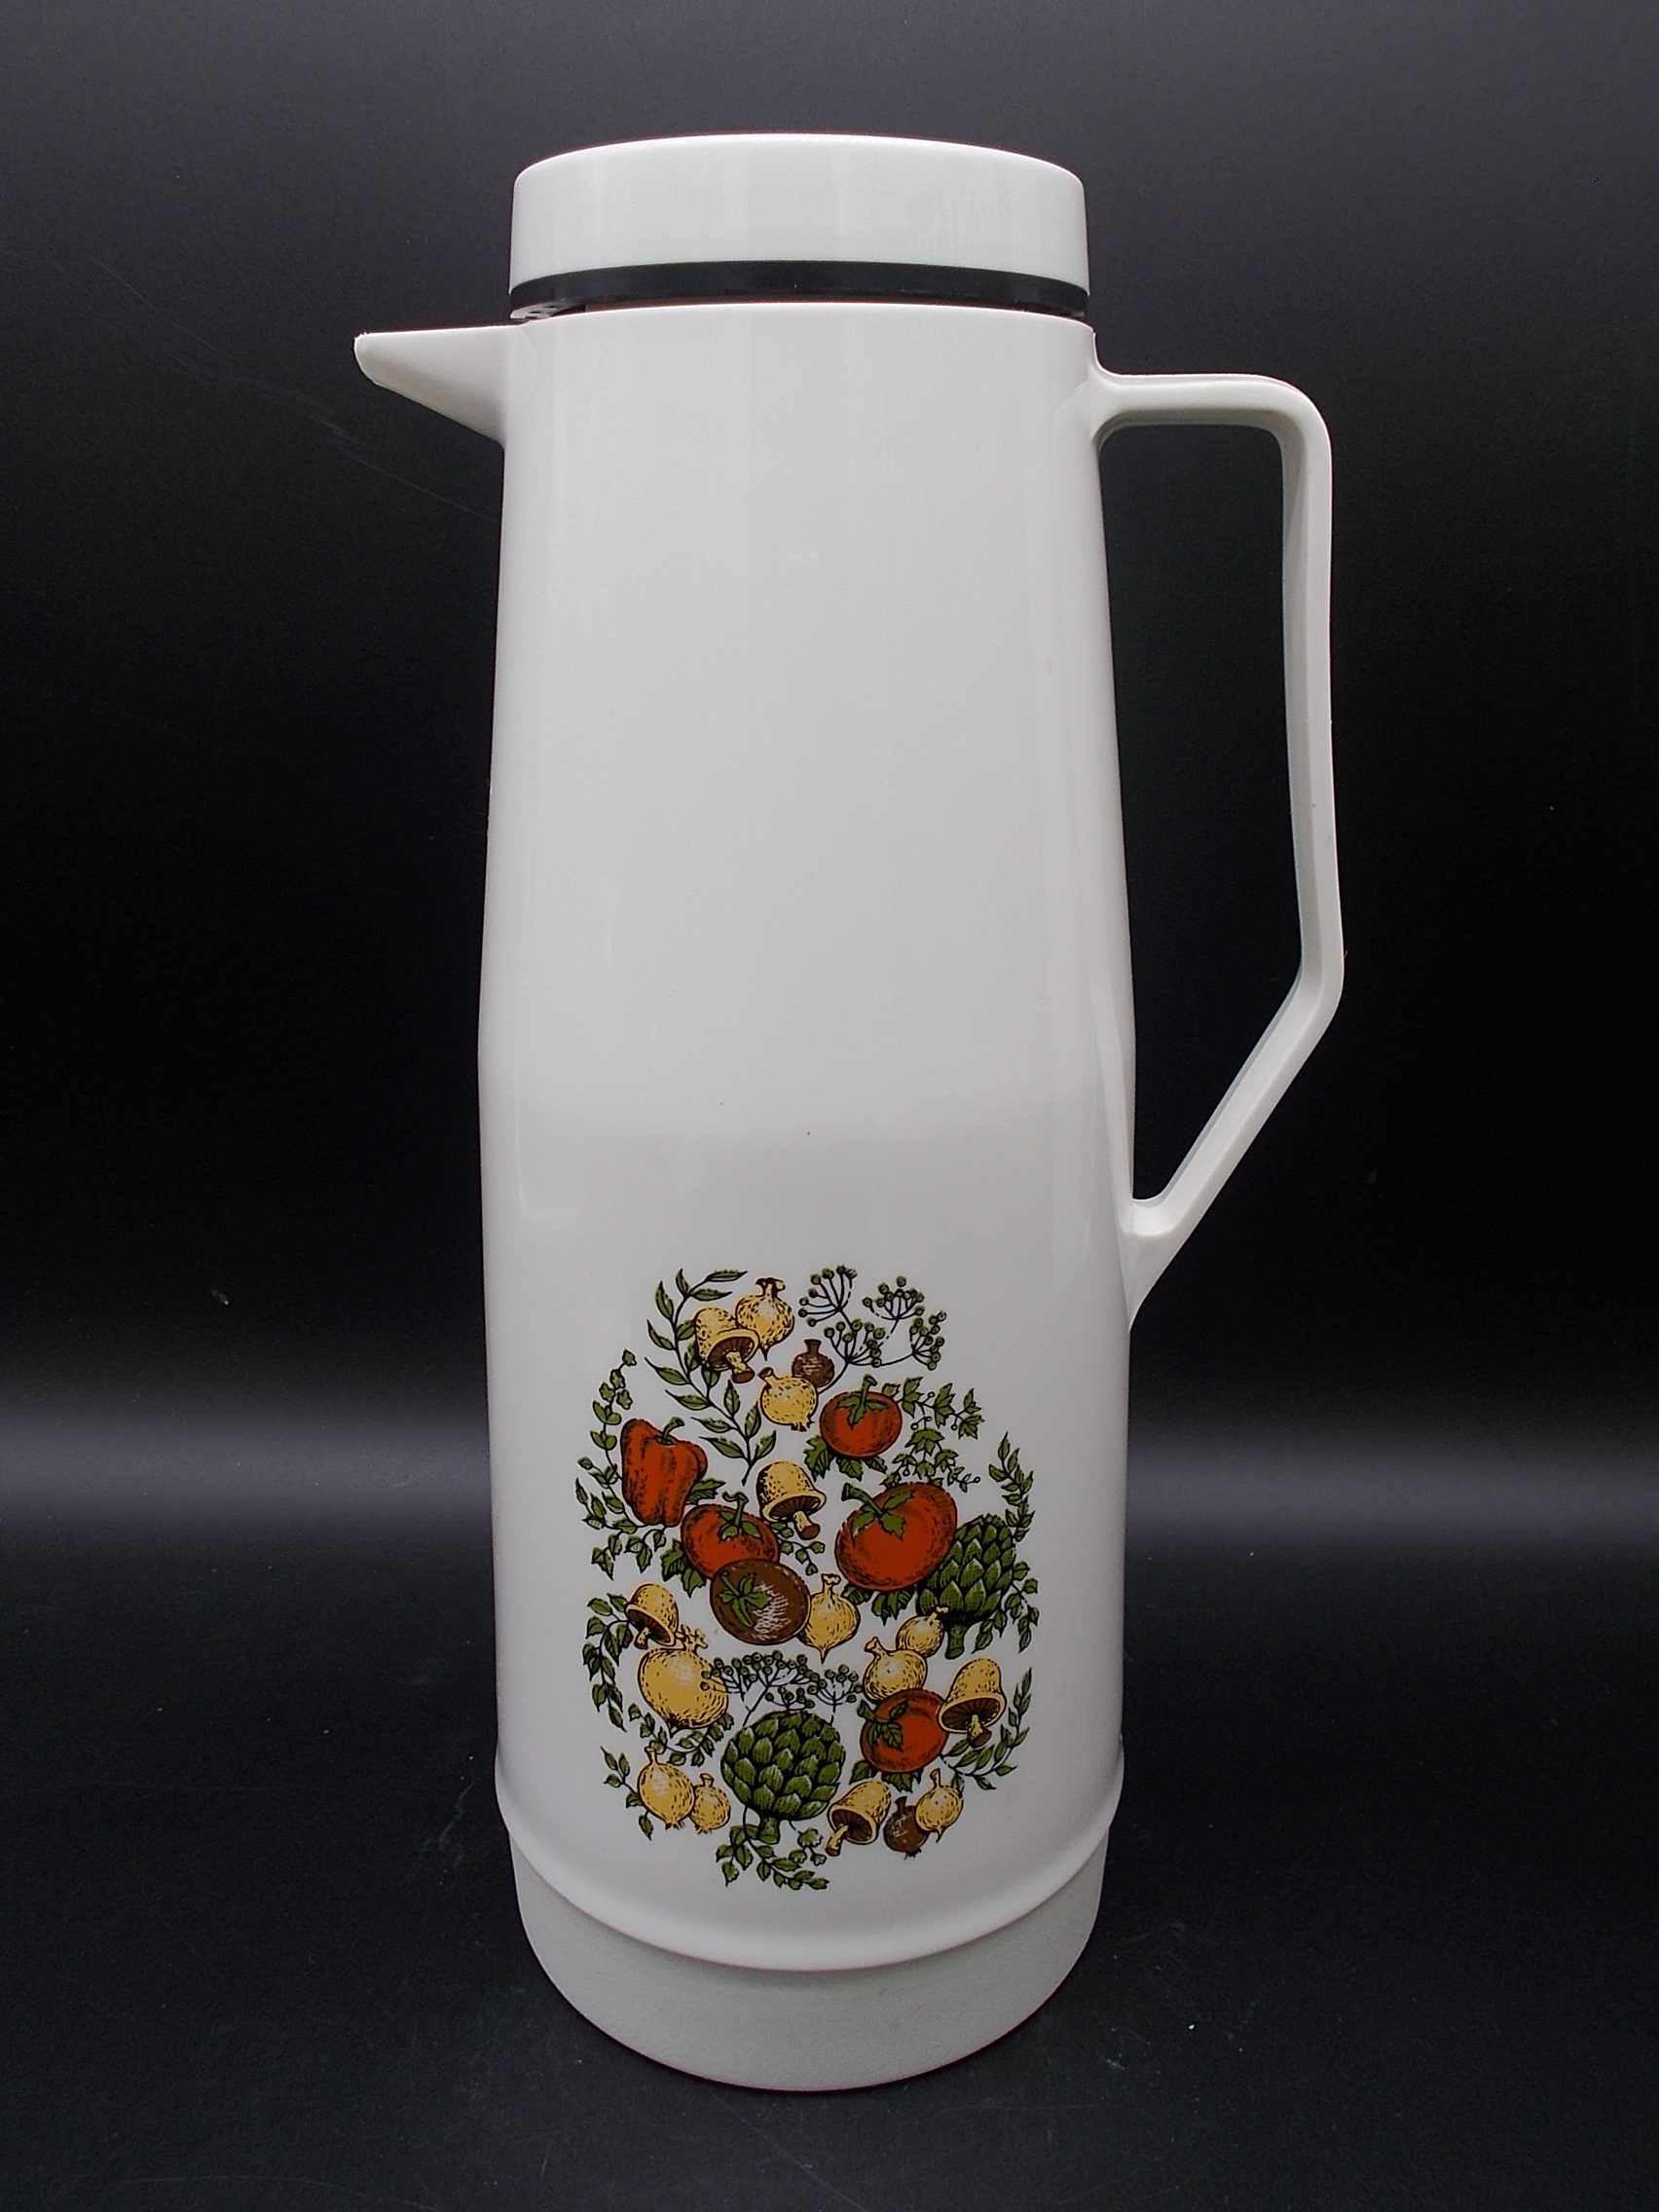 King-Seeley Thermos Coffee Carafe – Treasures Under Sugar Loaf – Antiques,  Collectibles, Home Decor and More